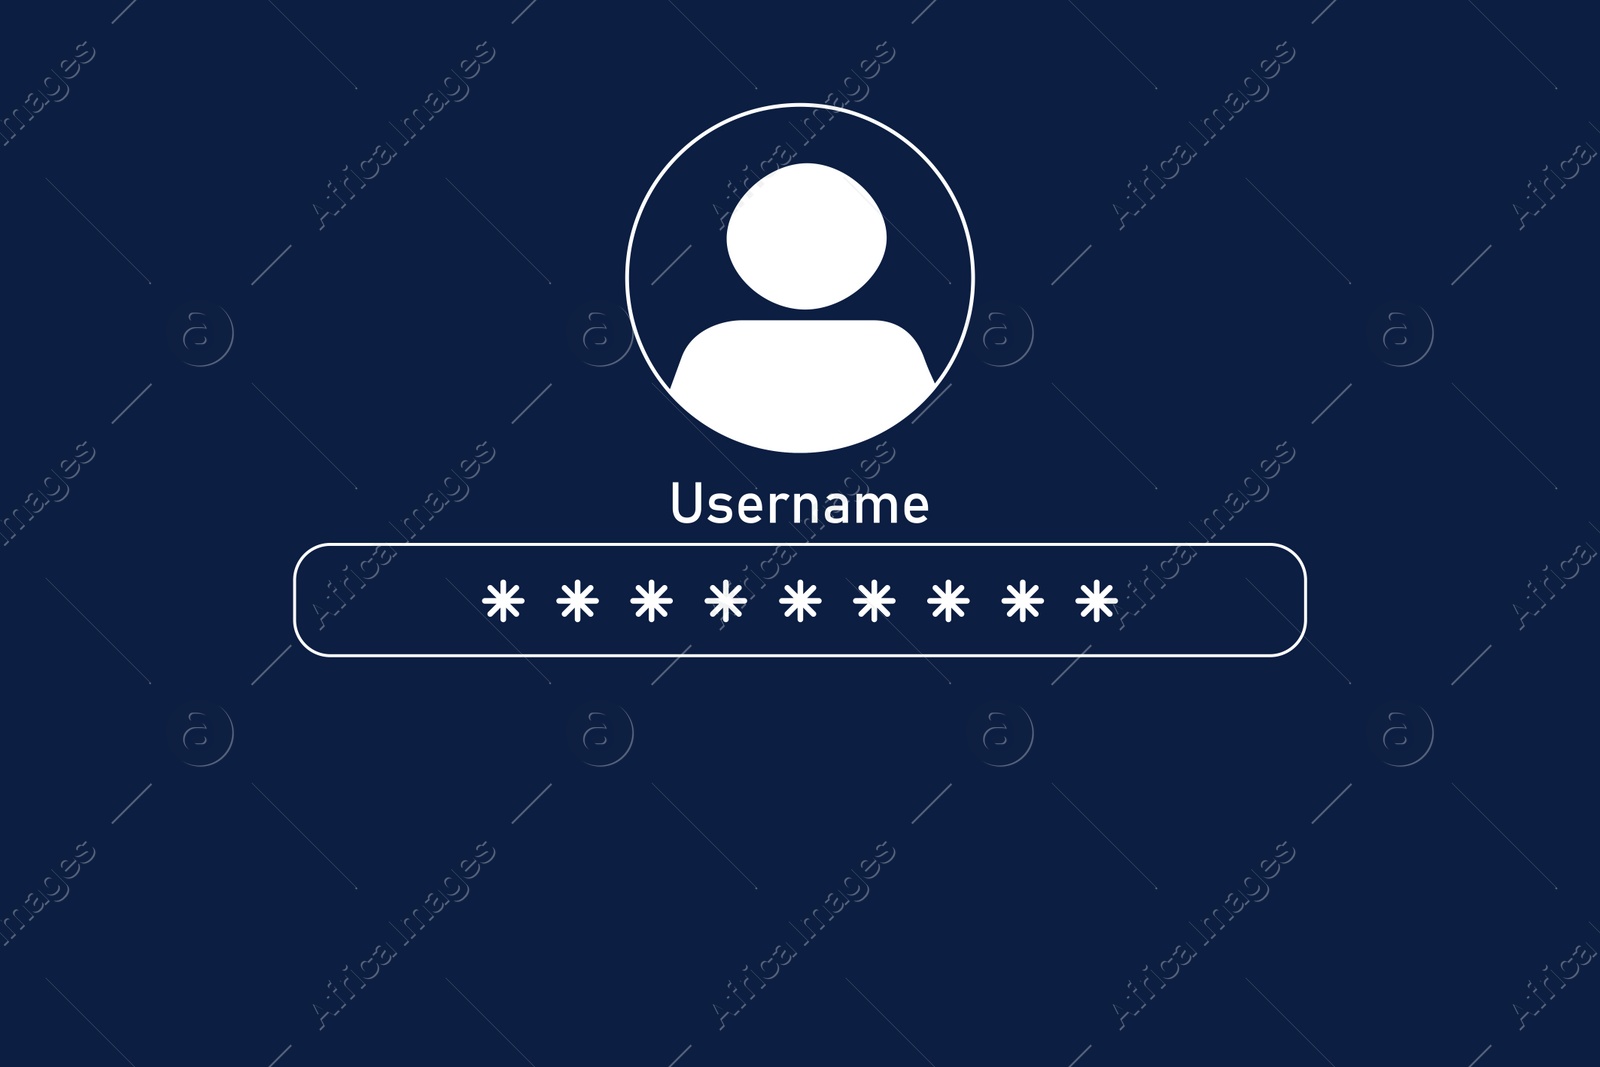 Illustration of Blocked screen of gadget with line for password, illustration. Cyber security